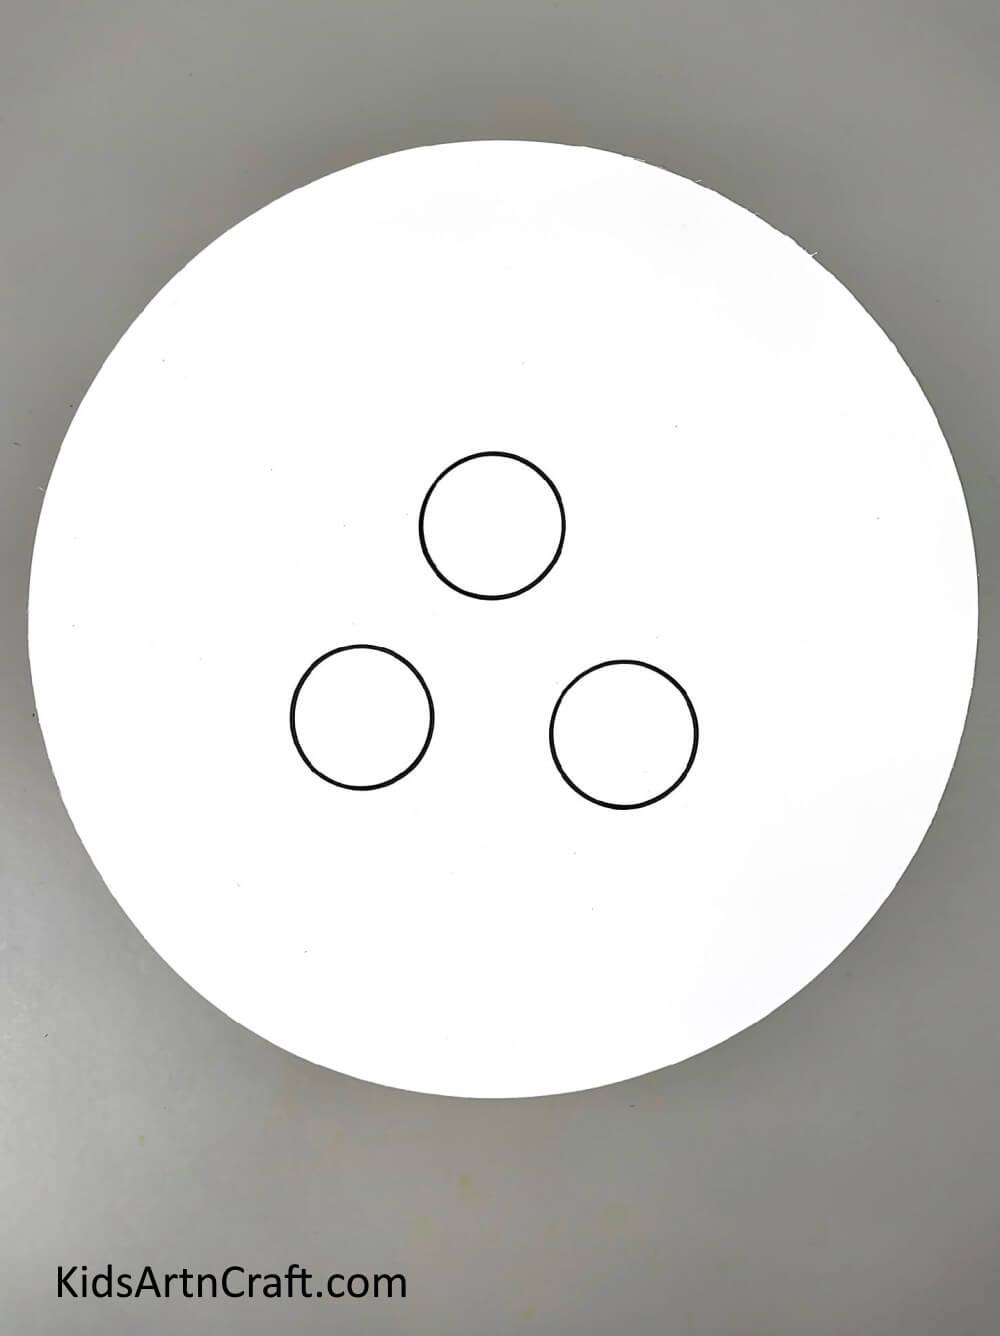 Drawing Three Circles On White Paper - An Effortless Method of Drawing a Chicken, Illustrated Step by Step